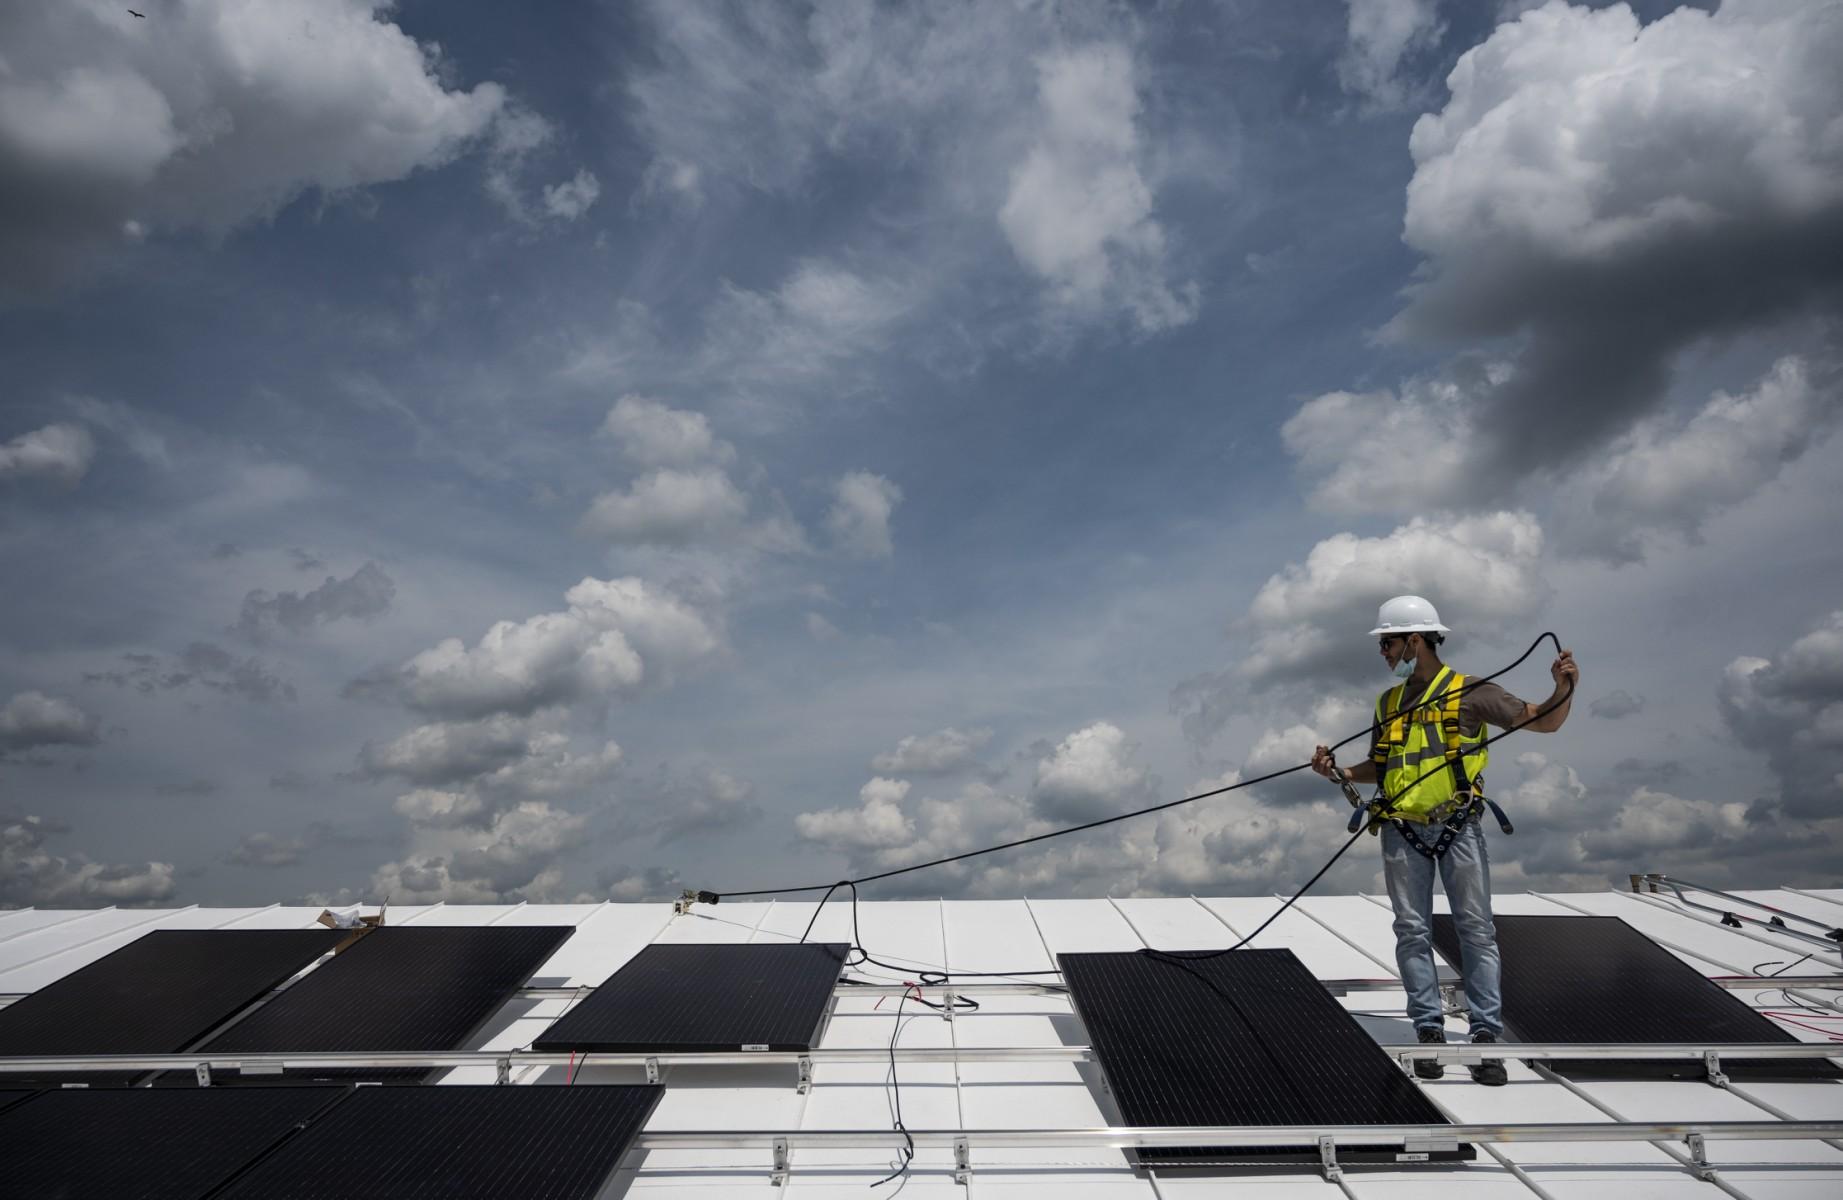 A worker installs solar panels on the roof of a church in Alexandria, Virginia on May 17, 2021. Manufacturing makes up a small portion of the US solar industry, with most of the jobs concentrated in project development, installation and construction. Photo: AFP